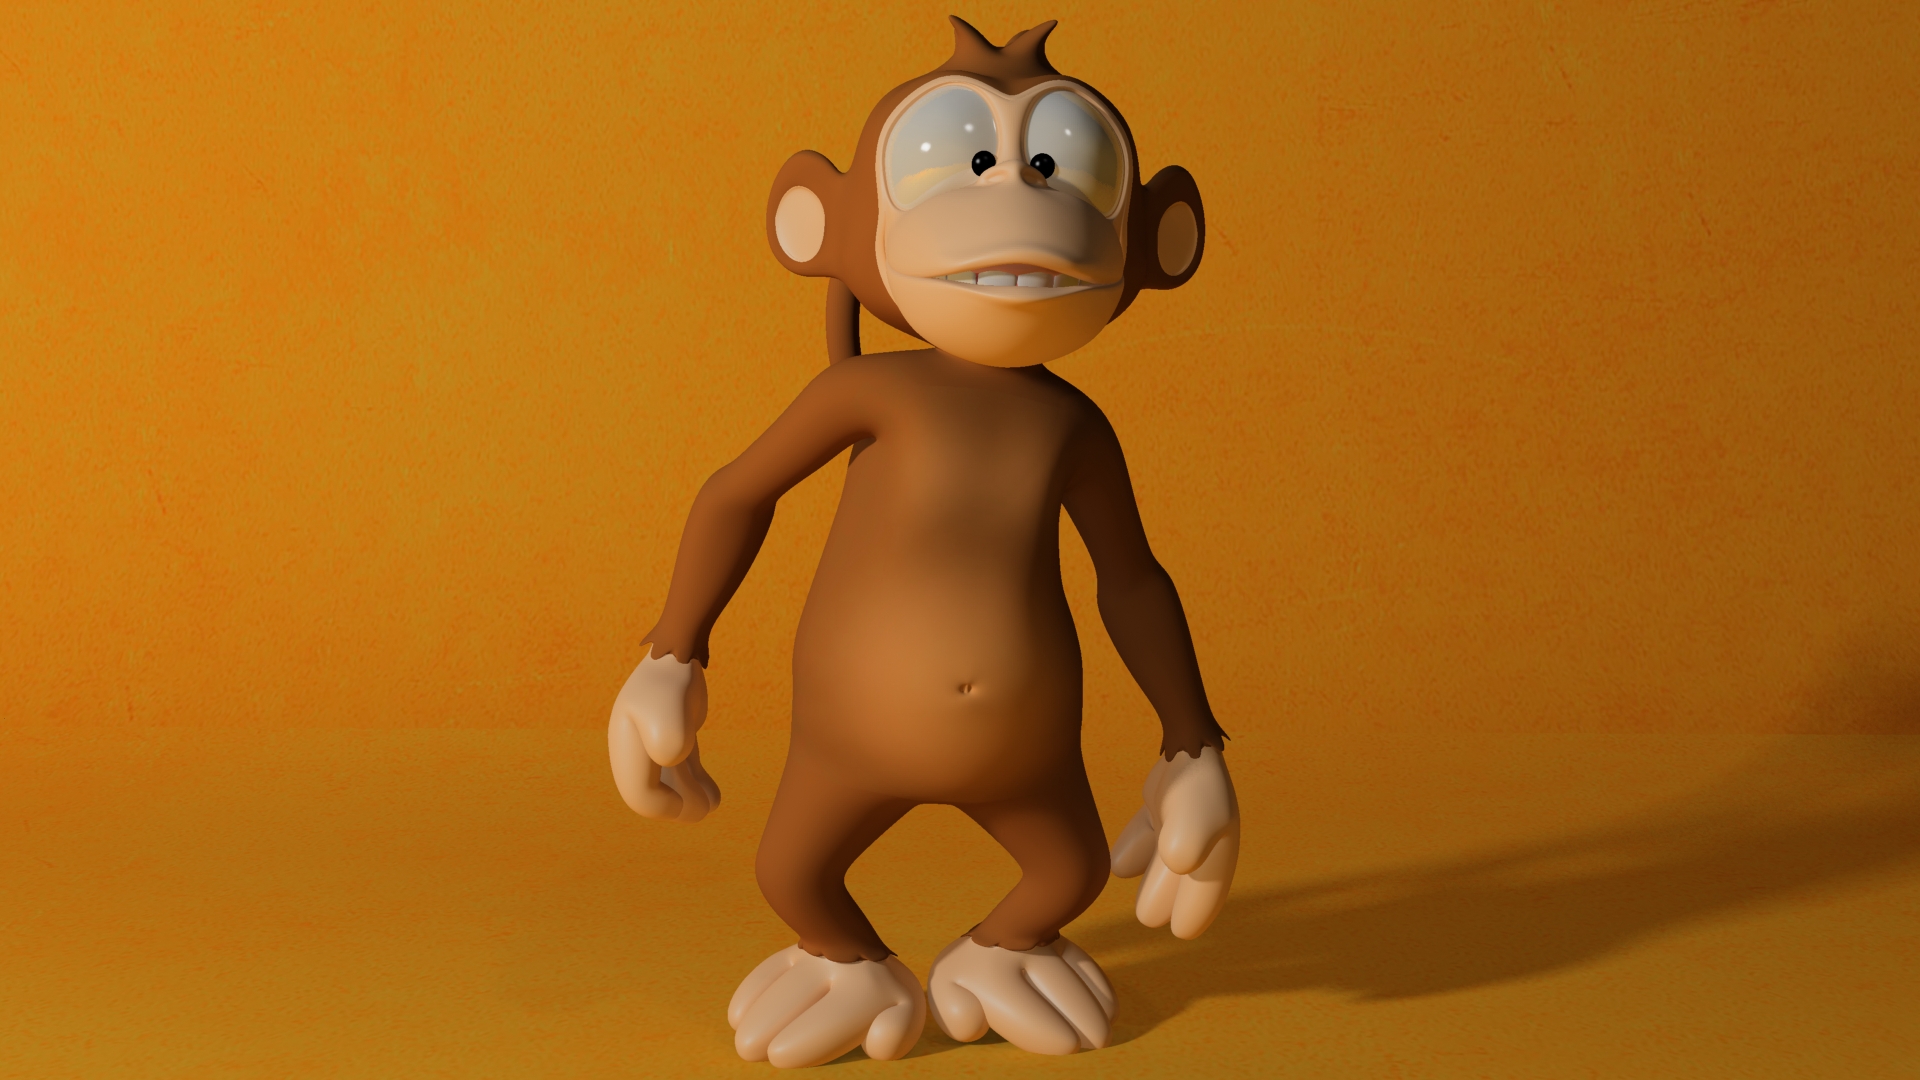 Cartoon Monkey 3D by supercigale